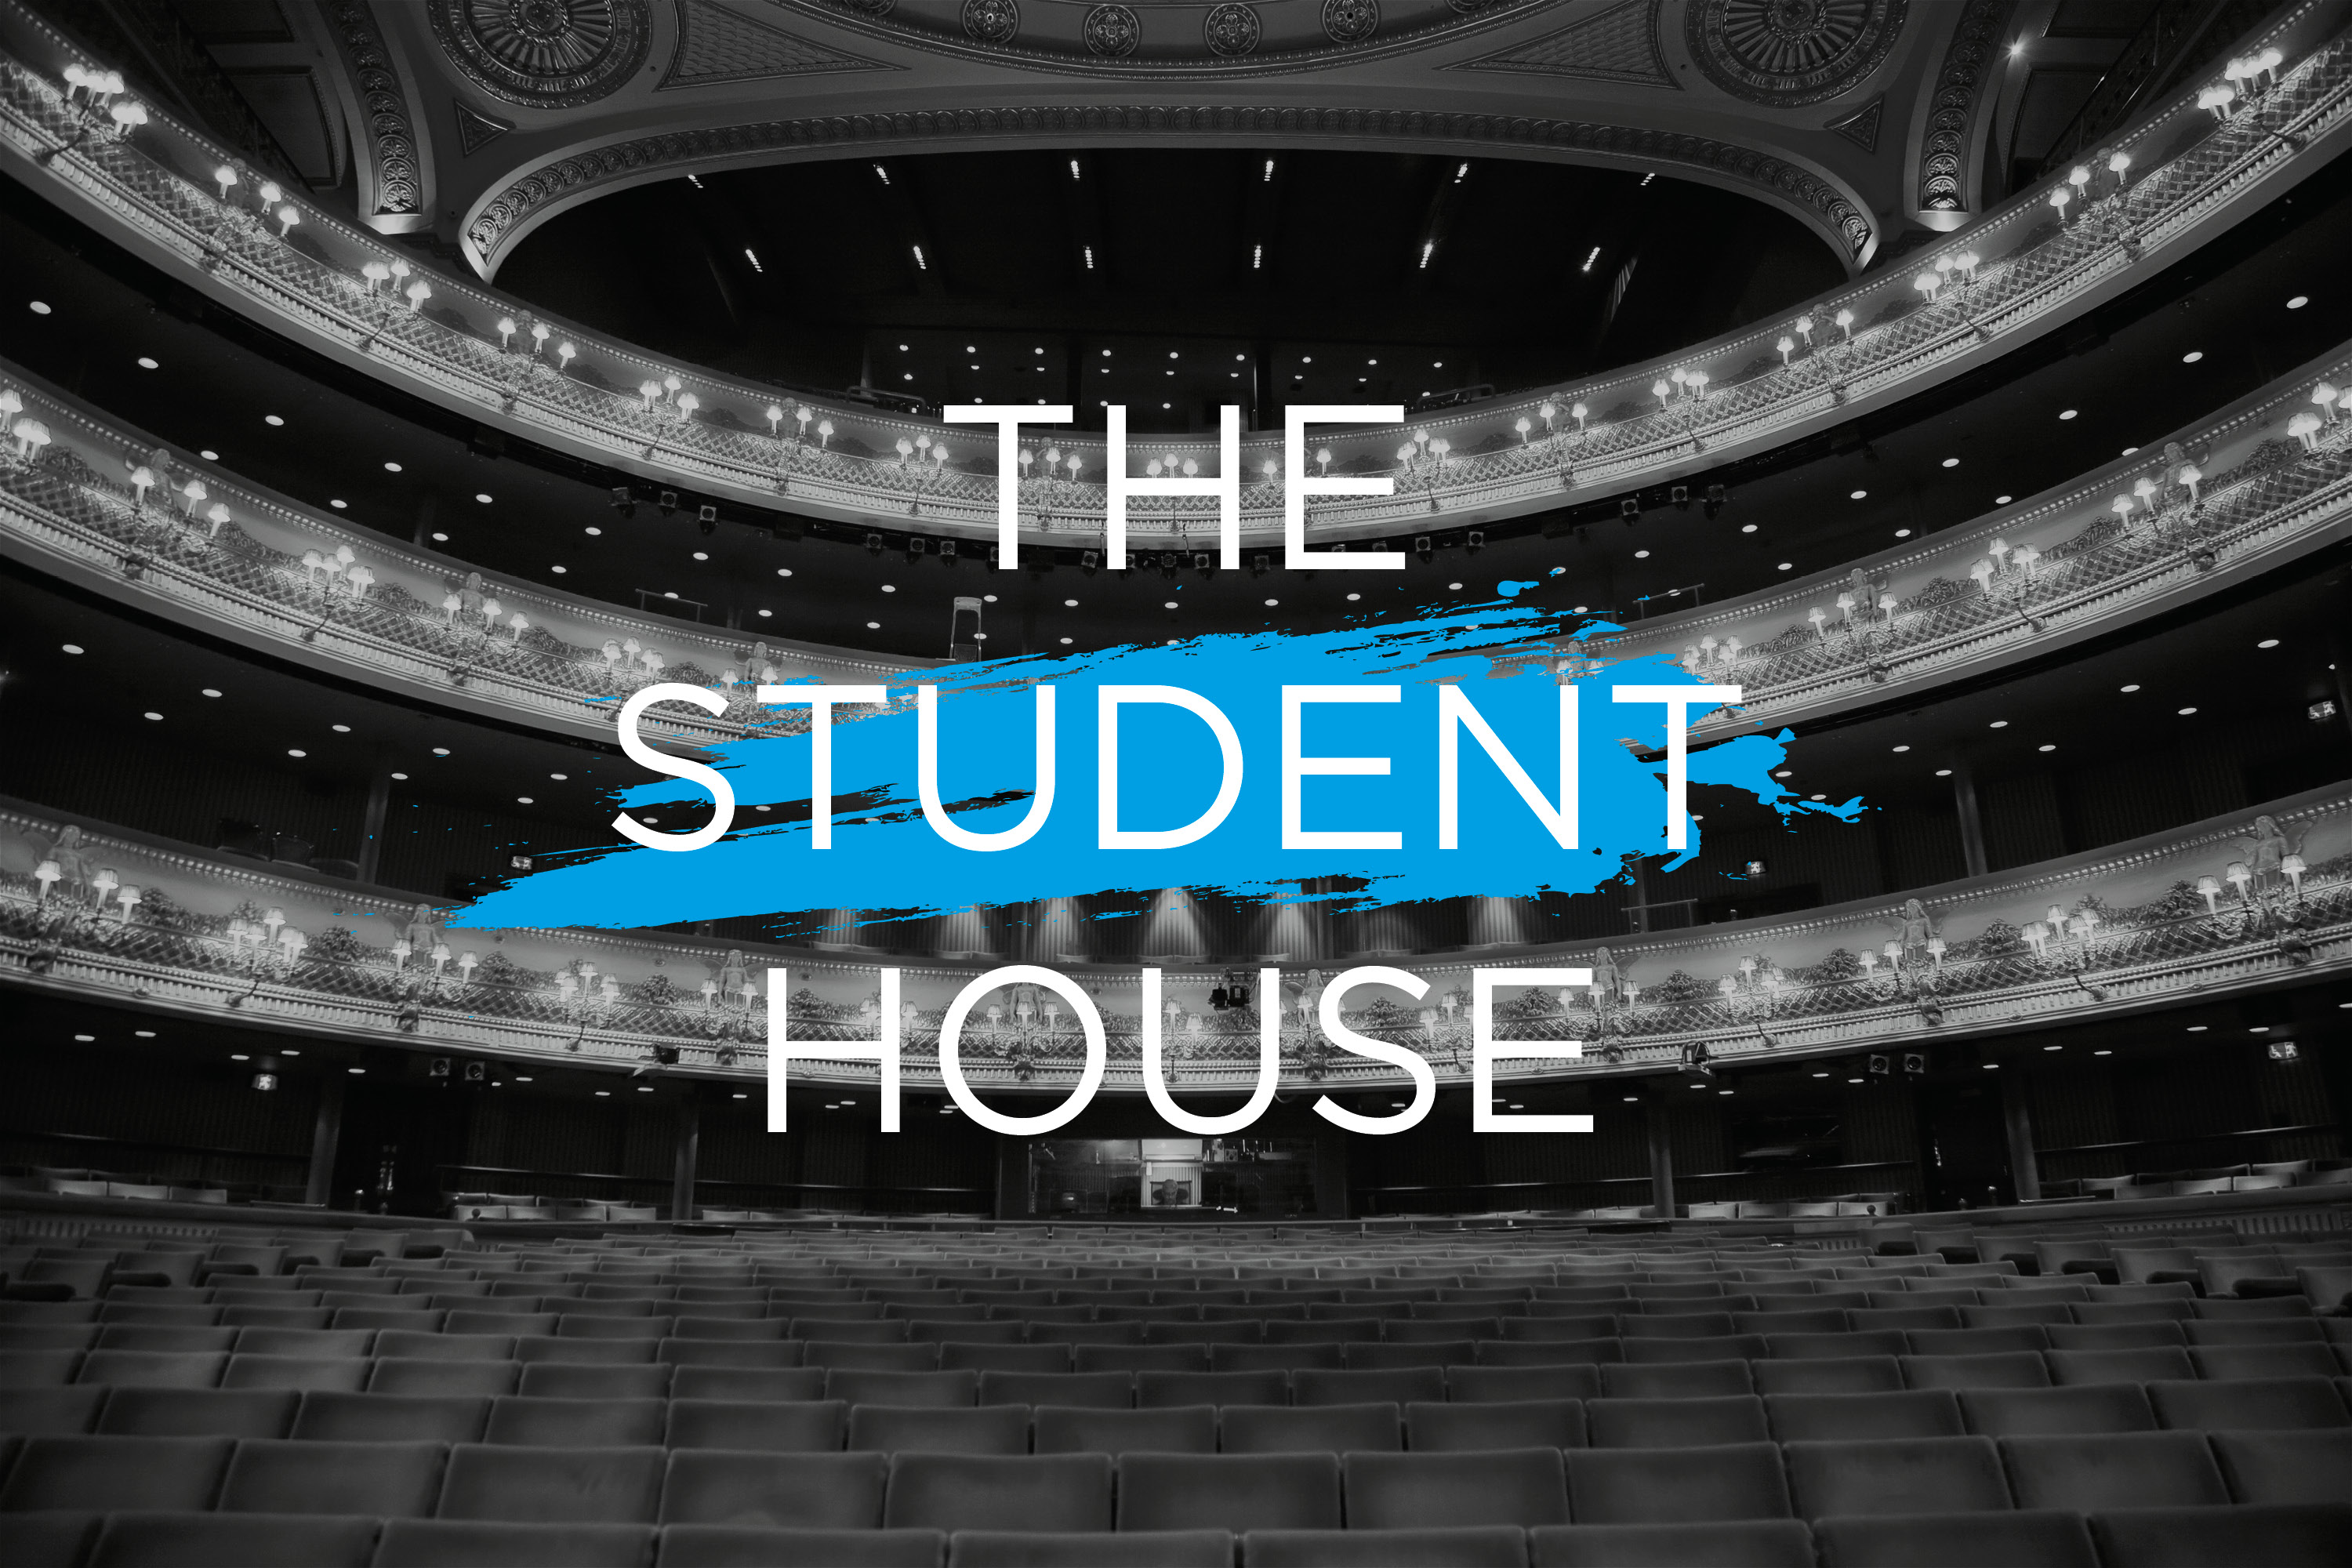 What Can the Royal Opera House Do For You?